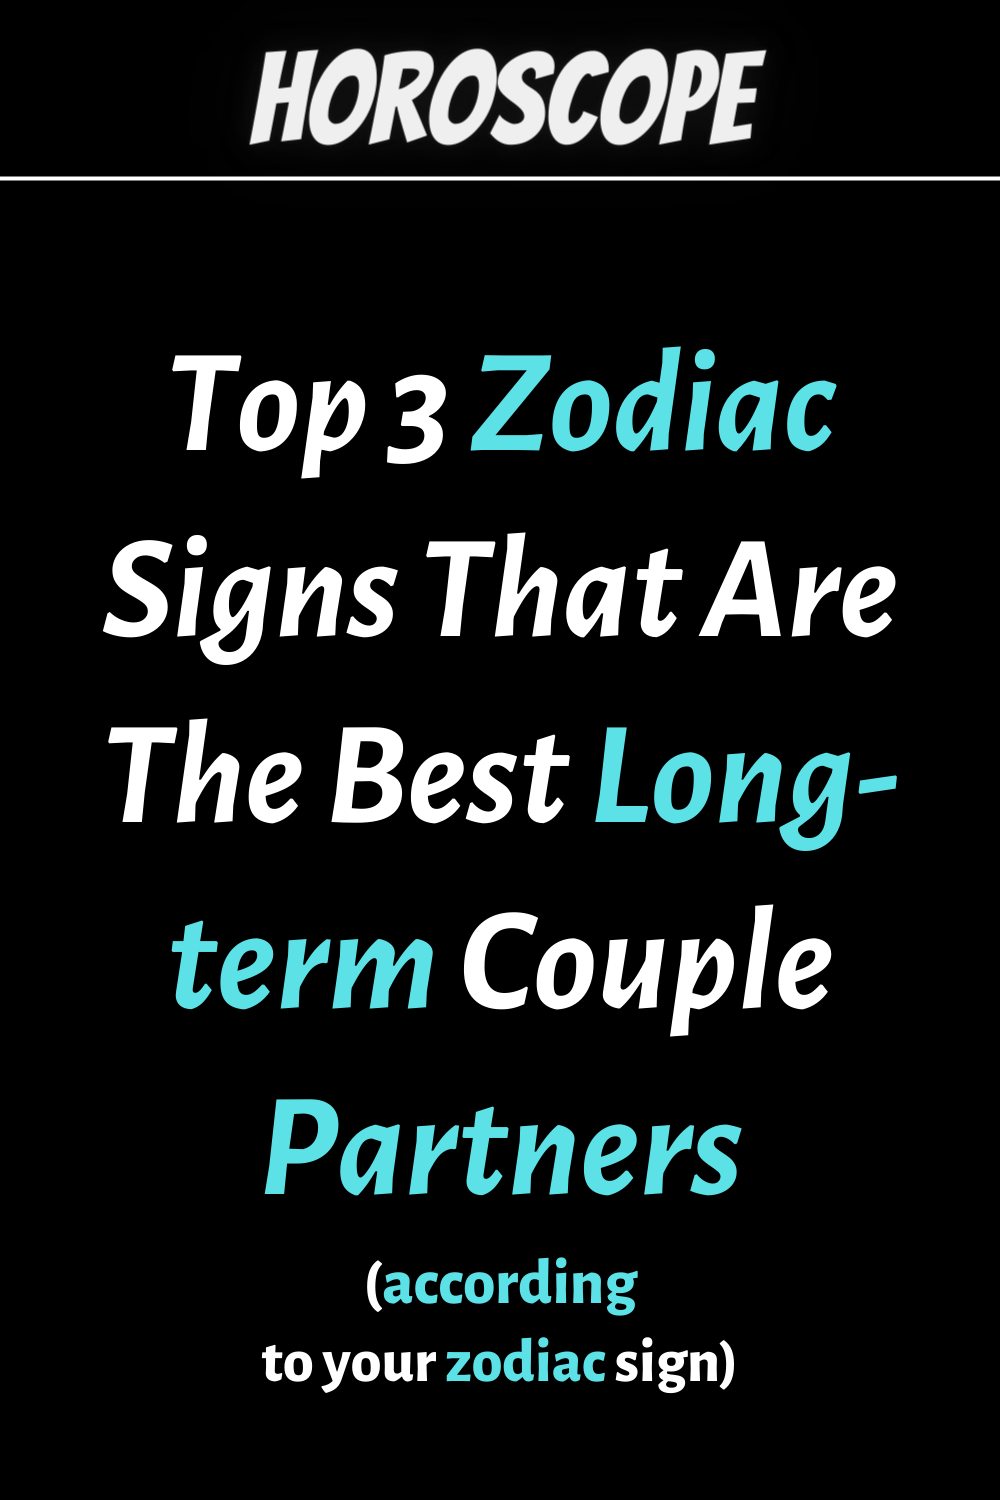 Top 3 Zodiac Signs That Are The Best Long-term Couple Partners